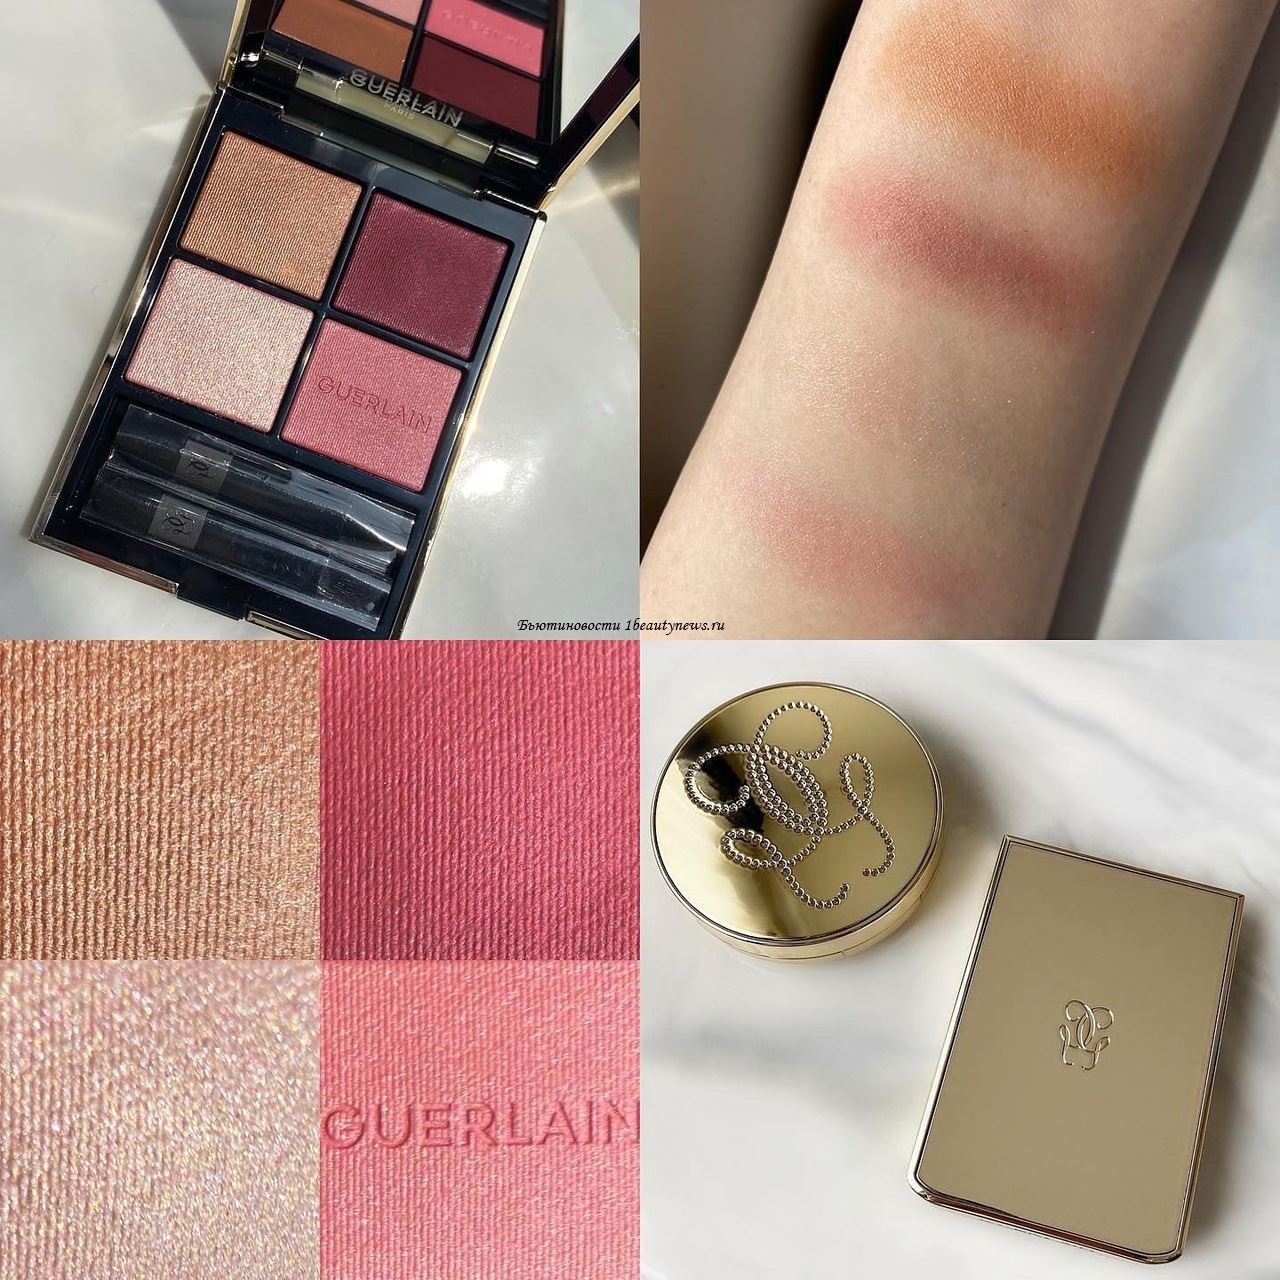 Guerlain Ombres G Eyeshadow Palette 2022 - 530 Majestic Rose - Swatches